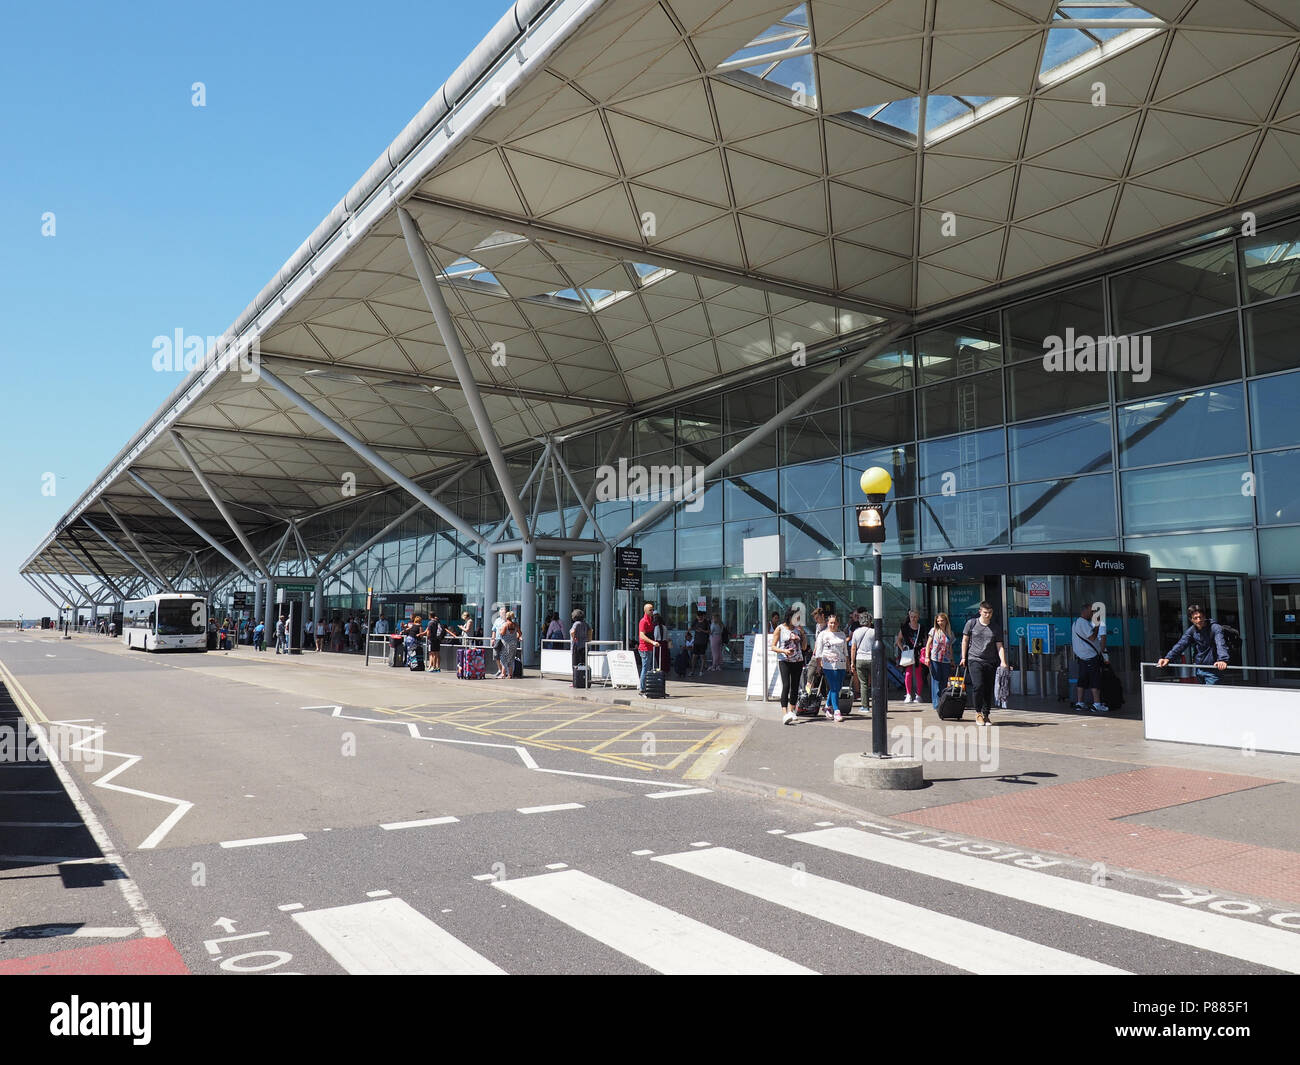 STANSTED, UK - CIRCA JUNE 2018: Travellers at London Stansted airport design by architect Lord Norman Foster Stock Photo